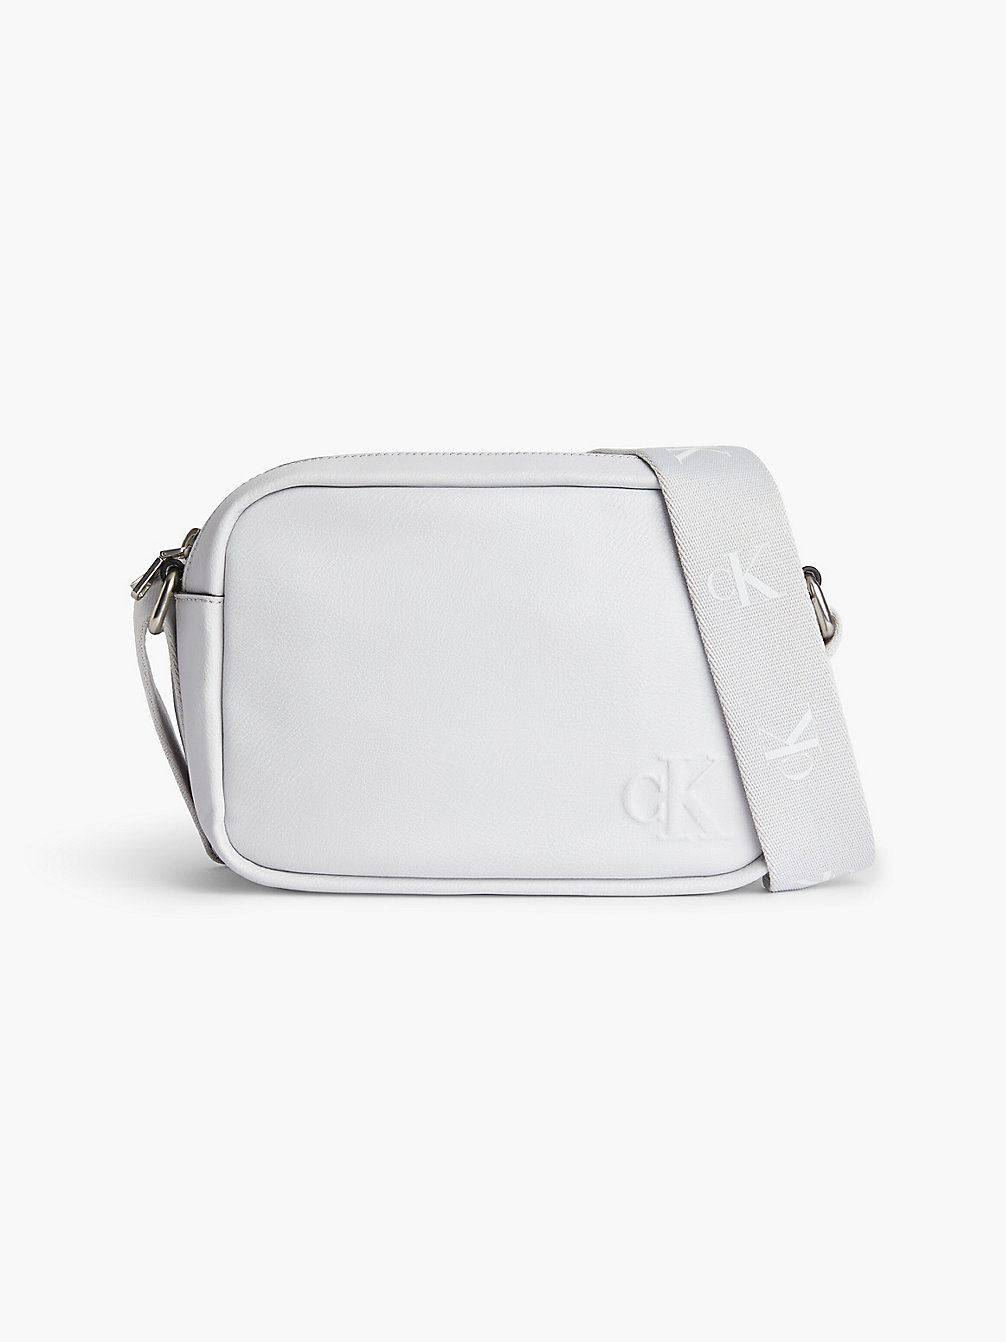 Women's Bags Sale - Up to 50% off | Calvin Klein®